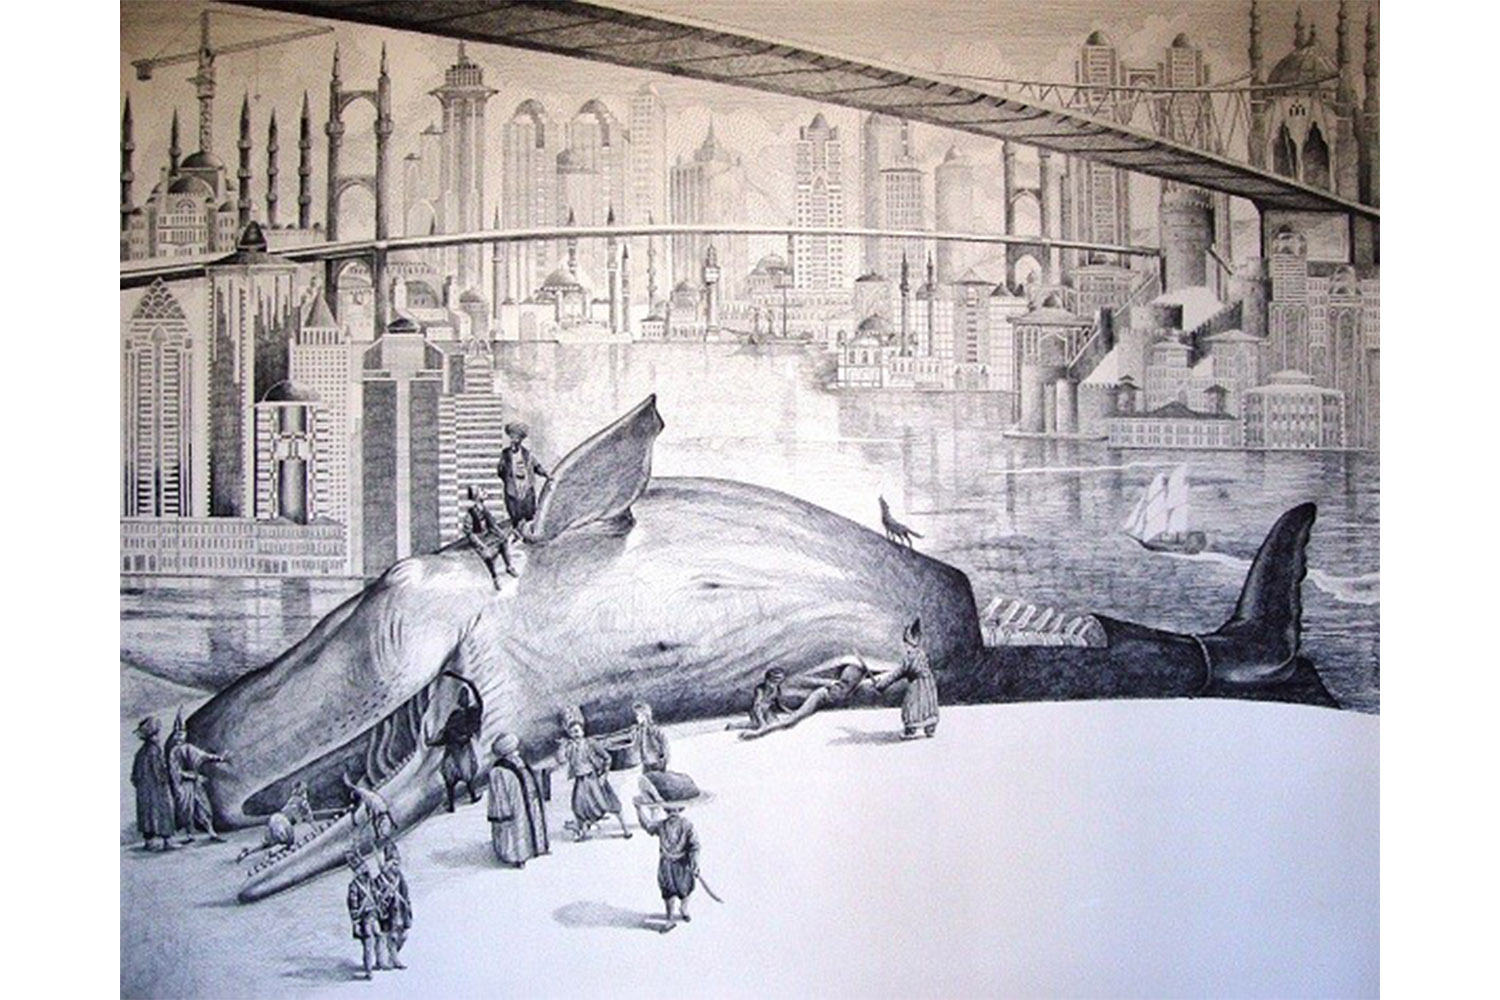 BURHAN KUM, Invasion of Istanbul by The New Ottomans, 2013